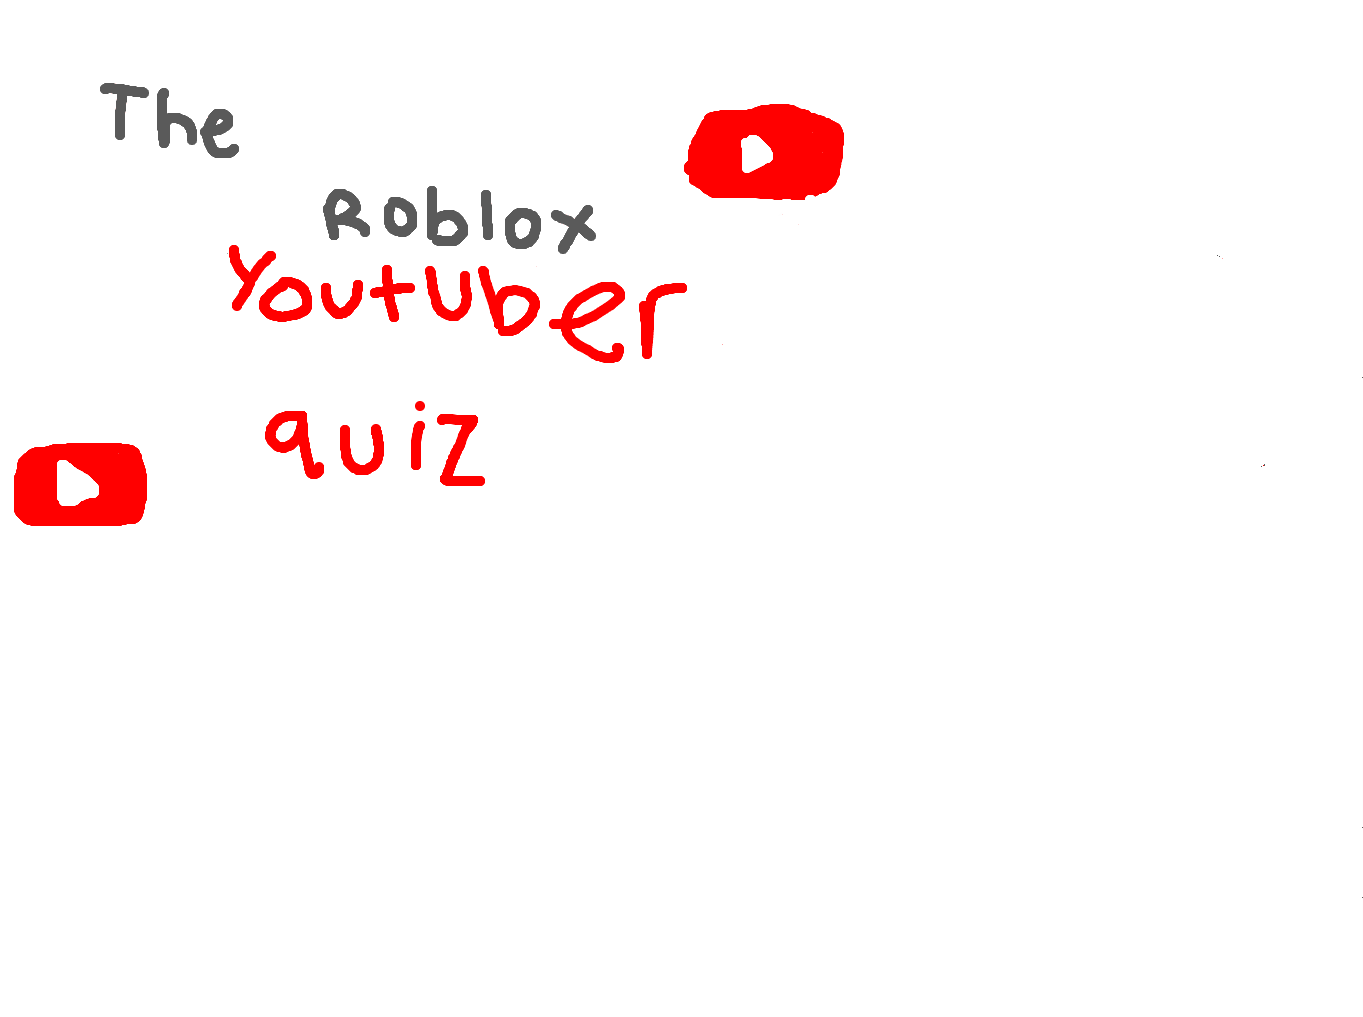 The Roblox youtuber QUIZ